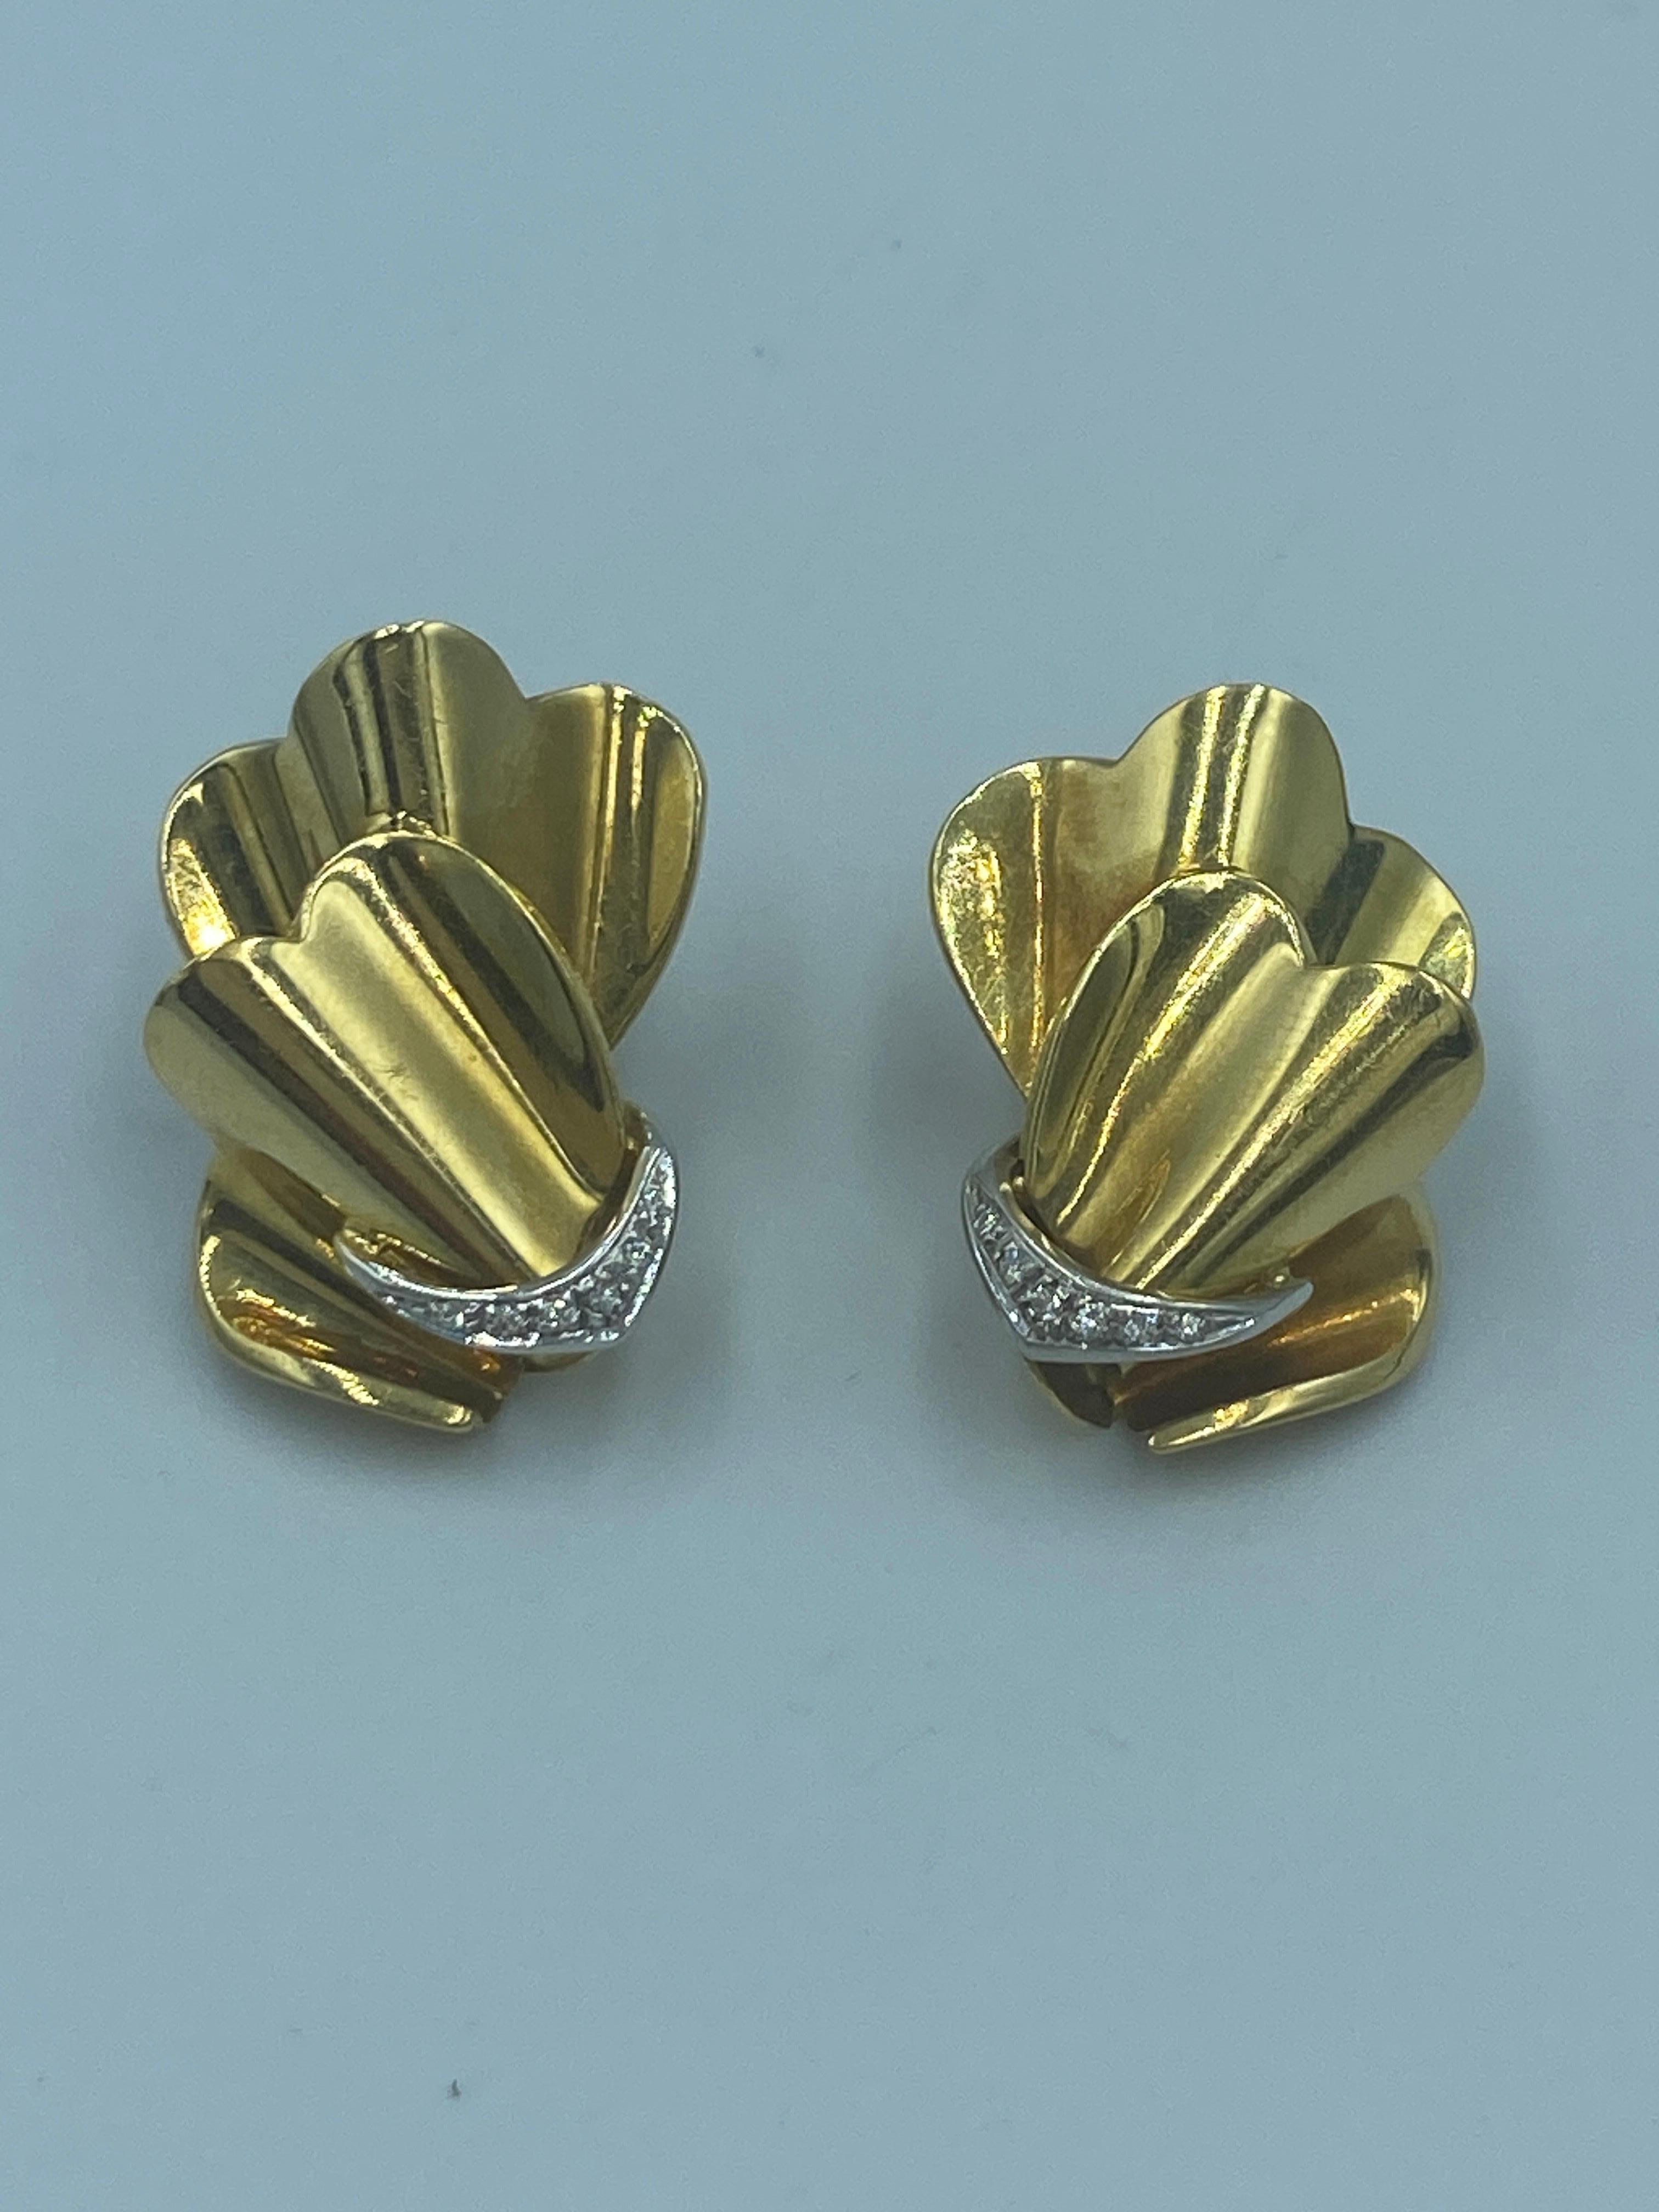 This attractive pair of 1970s 18 k gold Damiani earrings styled in the shape of fans are adorned with small round cut diamonds. The earrings have a pin as well as a lever back which make them most comfortable to wear. Although hefty in appearance